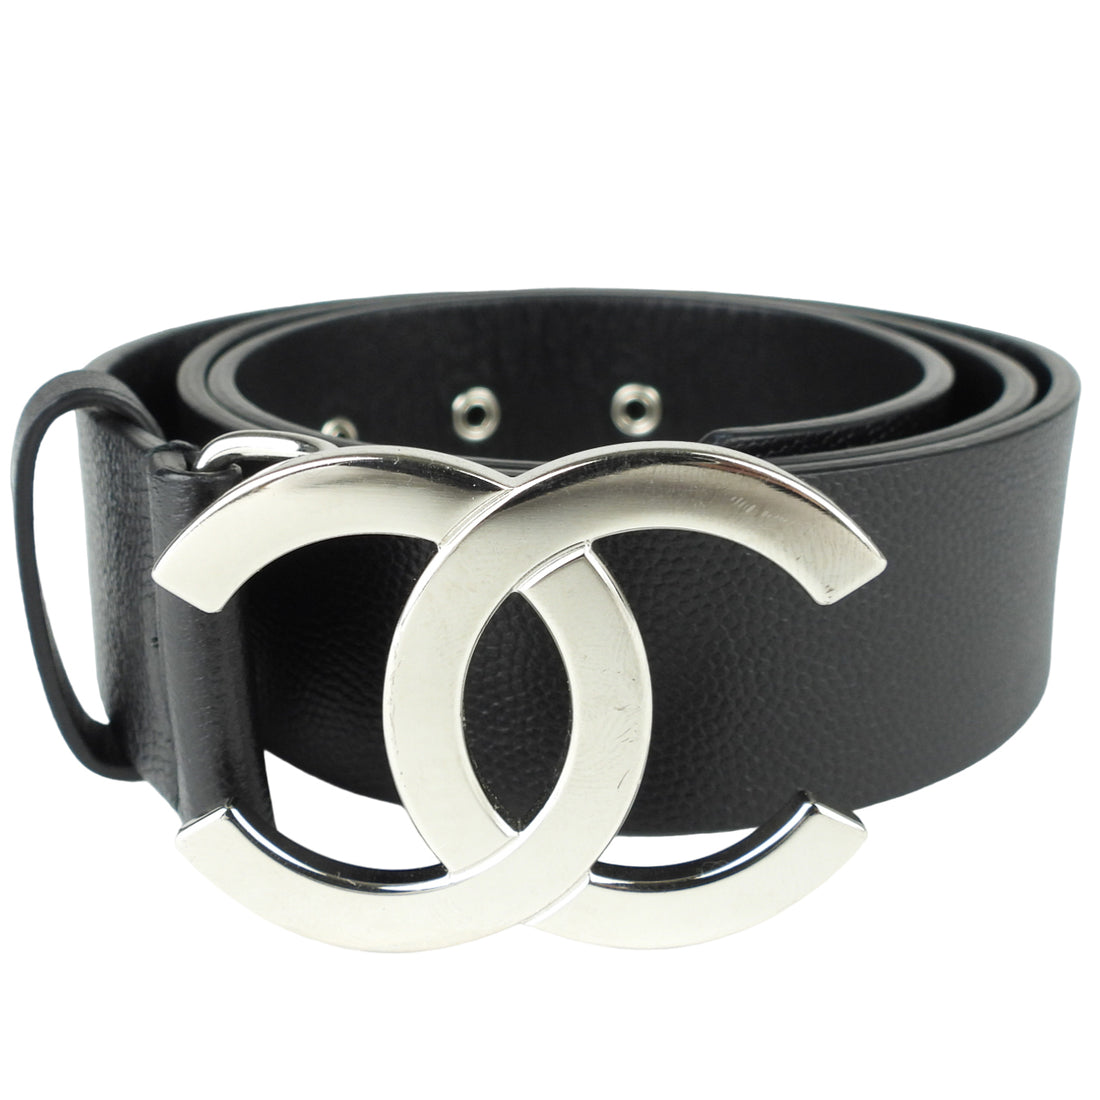 Chanel - Authenticated Belt - Leather Black Plain for Women, Good Condition